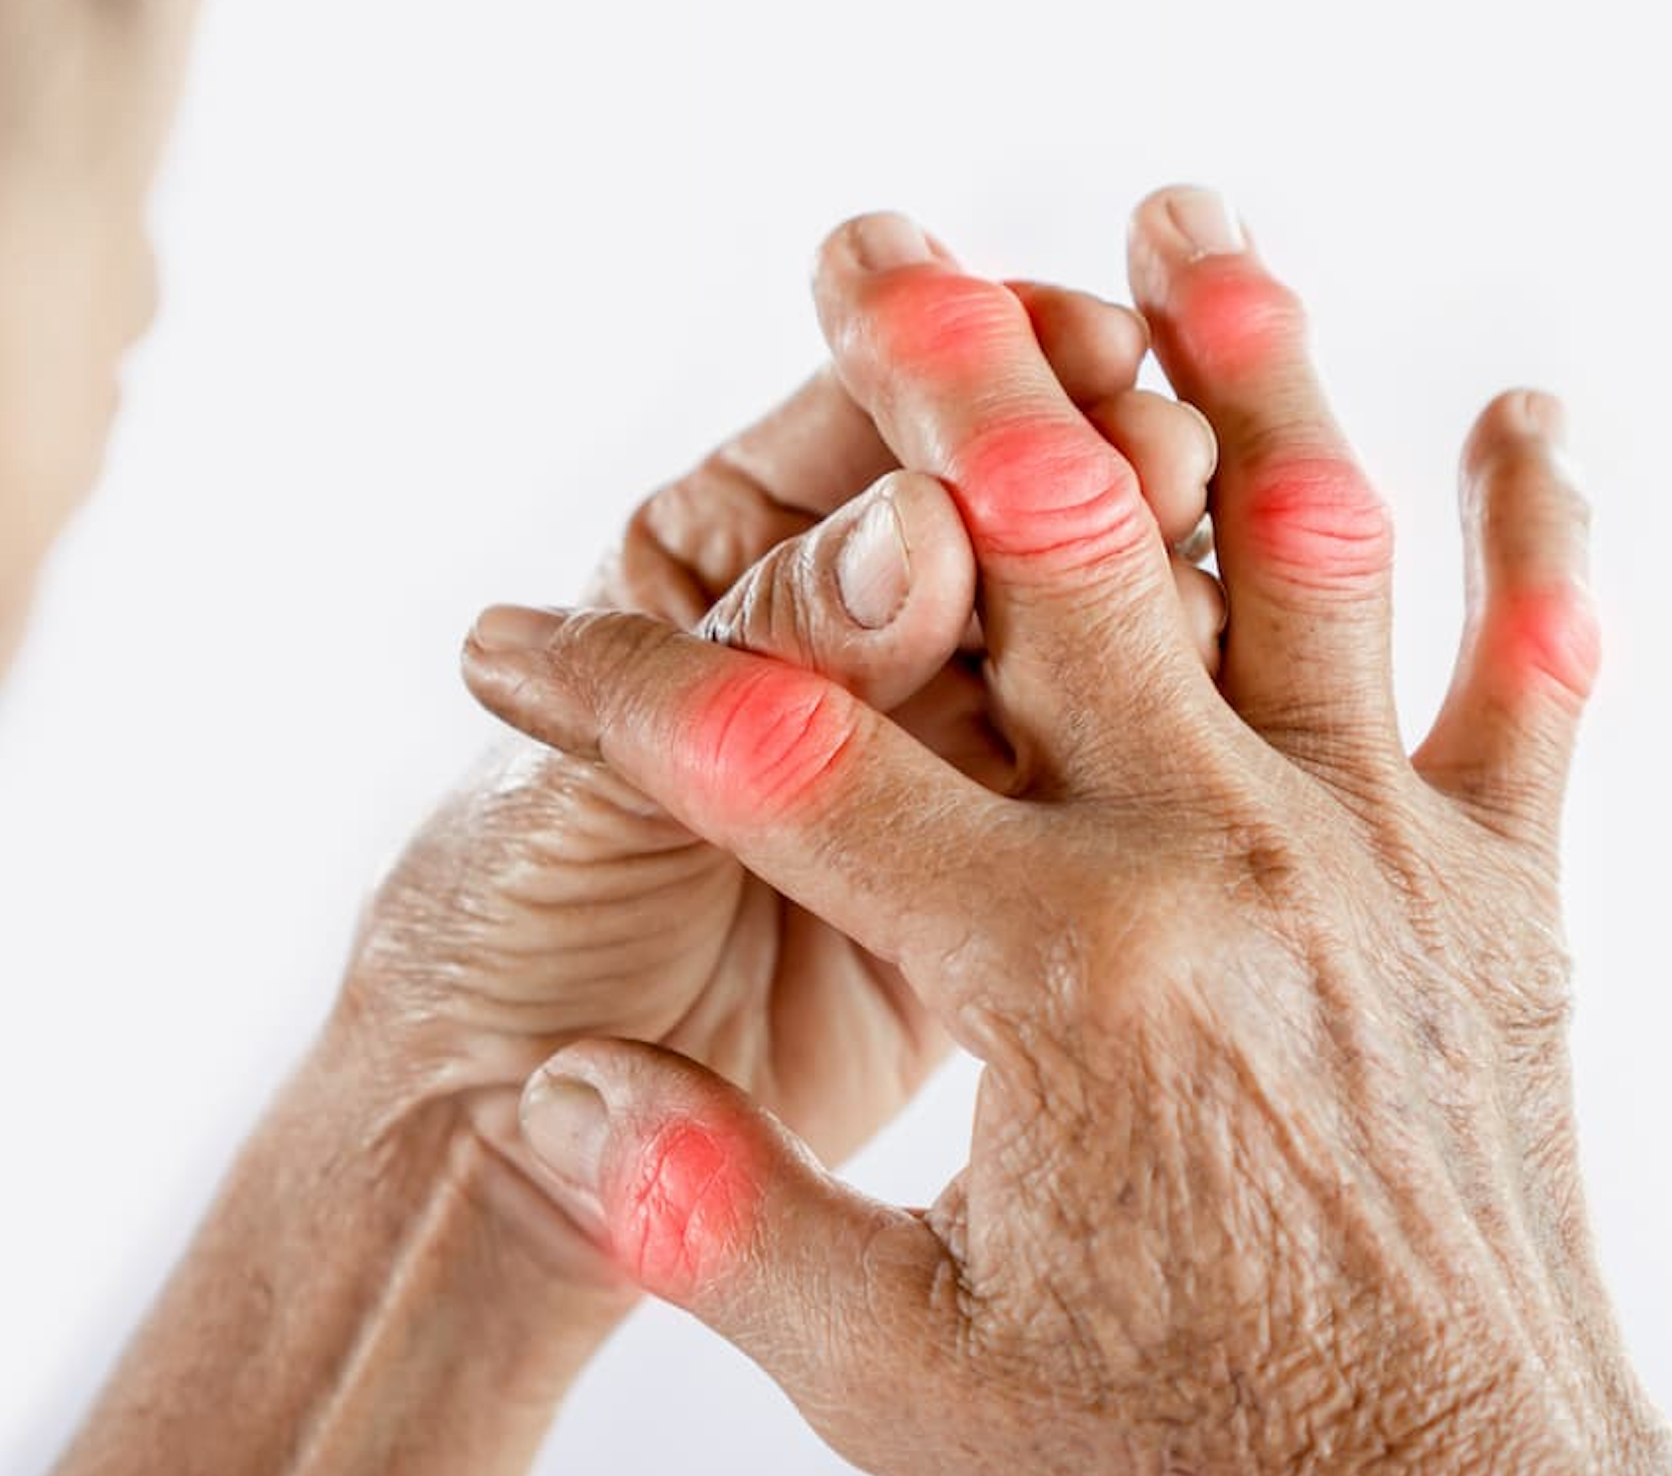 Study Evaluates SIRI as a Potential Inflammatory Marker in Gouty Arthritis